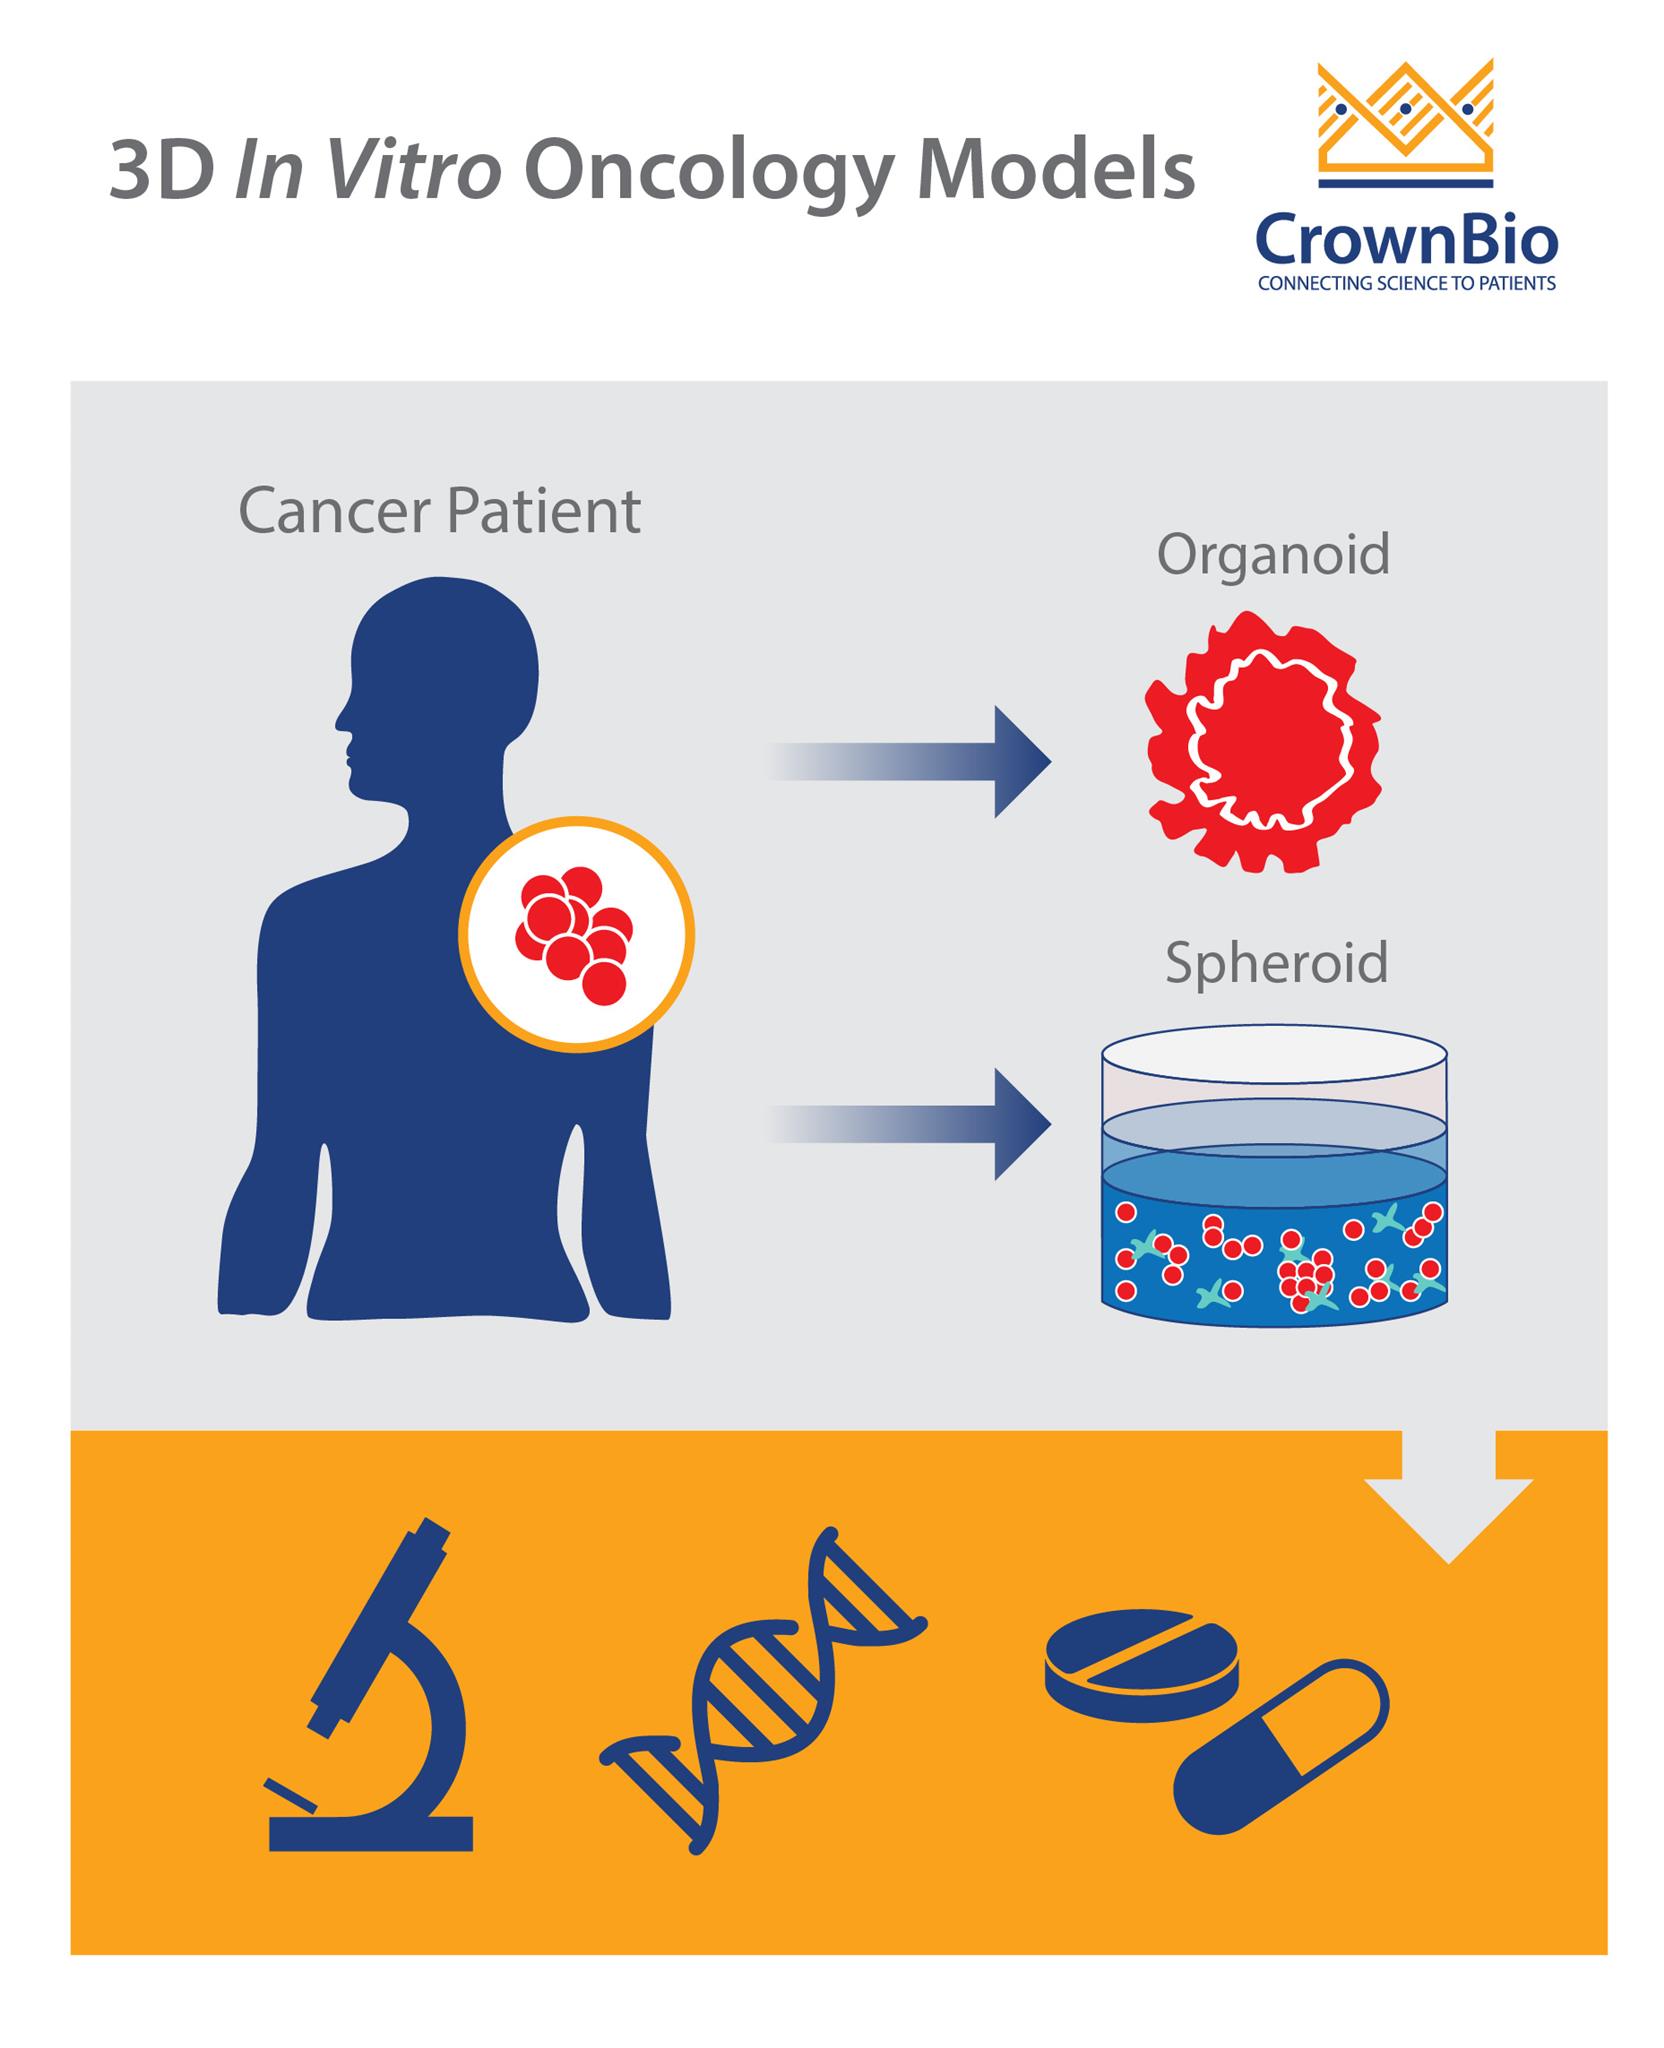 Facilitating Drug Discovery with 3D In Vitro Oncology Models